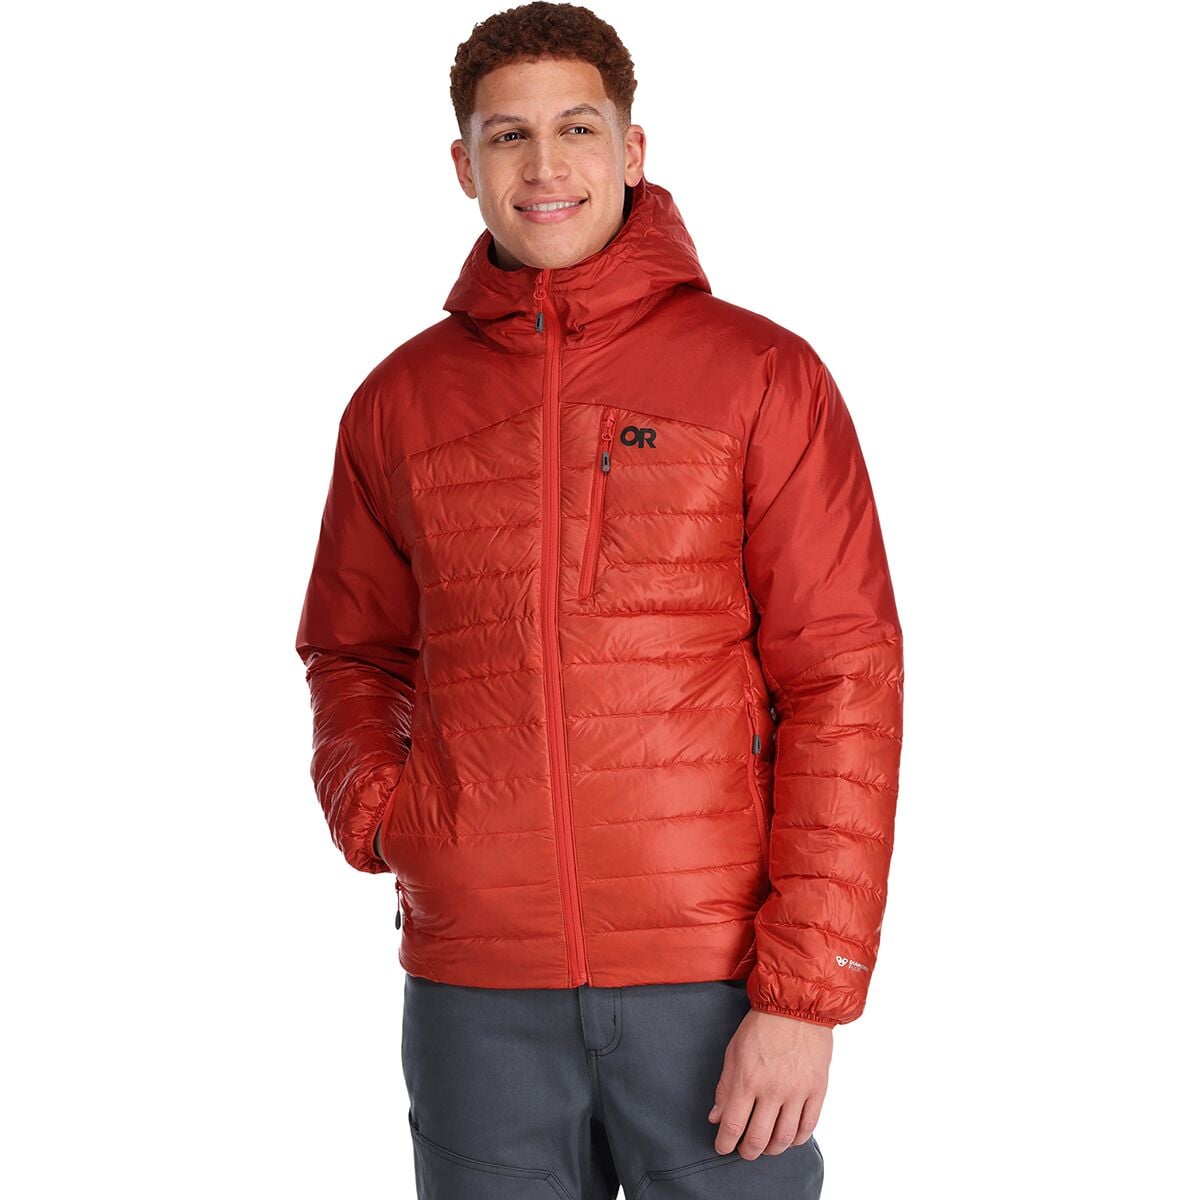  Outdoor Research Helium Down Hooded Jacket - Men's Current price: